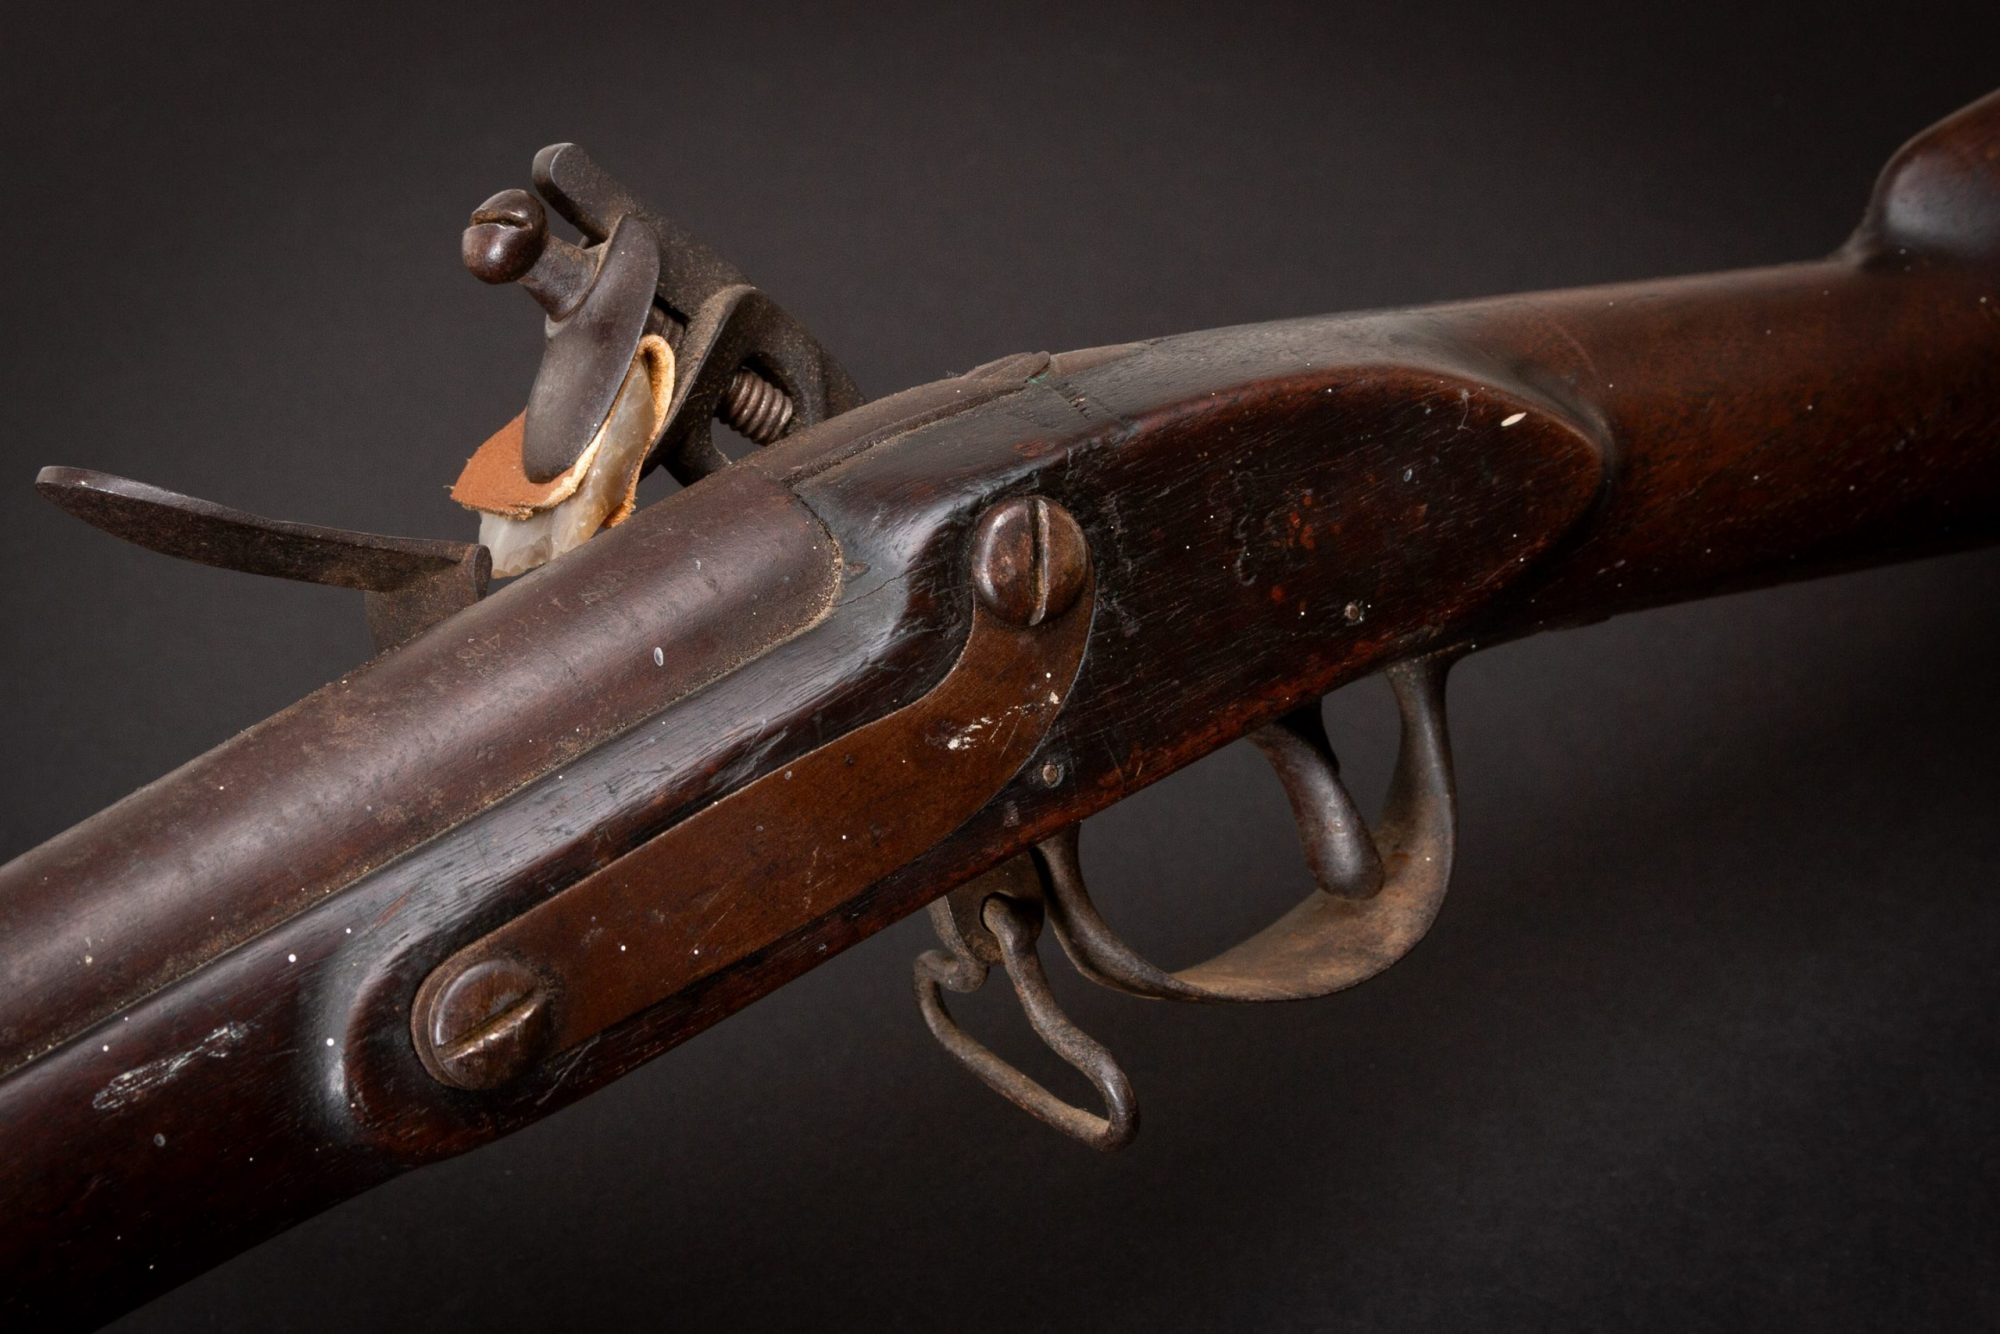 Photo of a Harper's Ferry Model 1795 Flintlock Musket from 1810, sold as-is by Turnbull Restoration in Bloomfield, NY